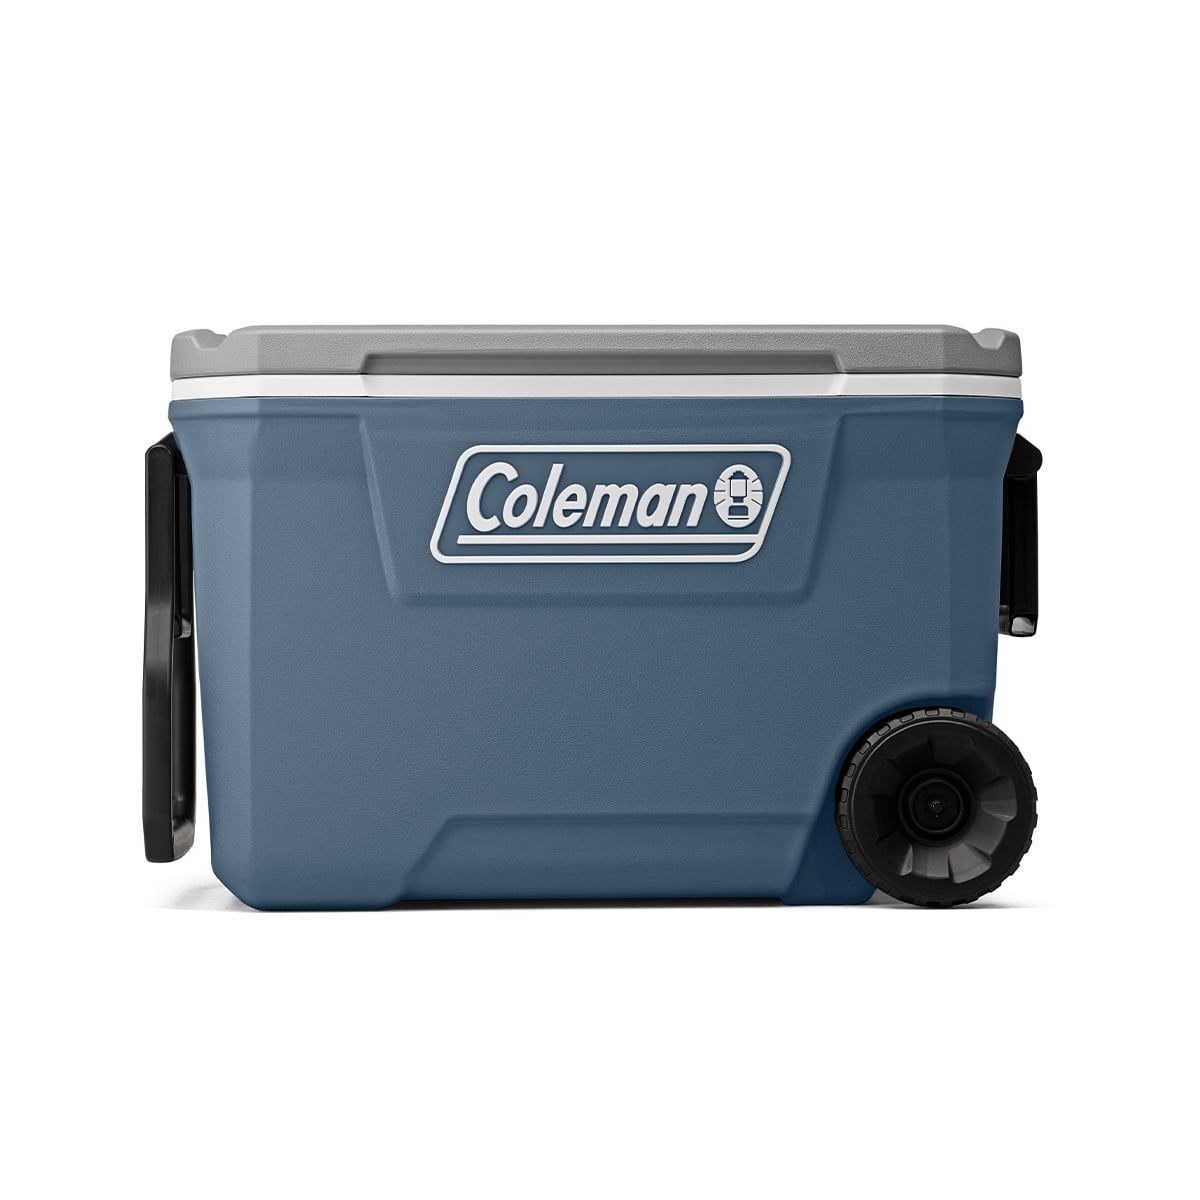 Coleman 316 Series 60QT Hard Chest Wheeled Cooler, Lakeside Blue 